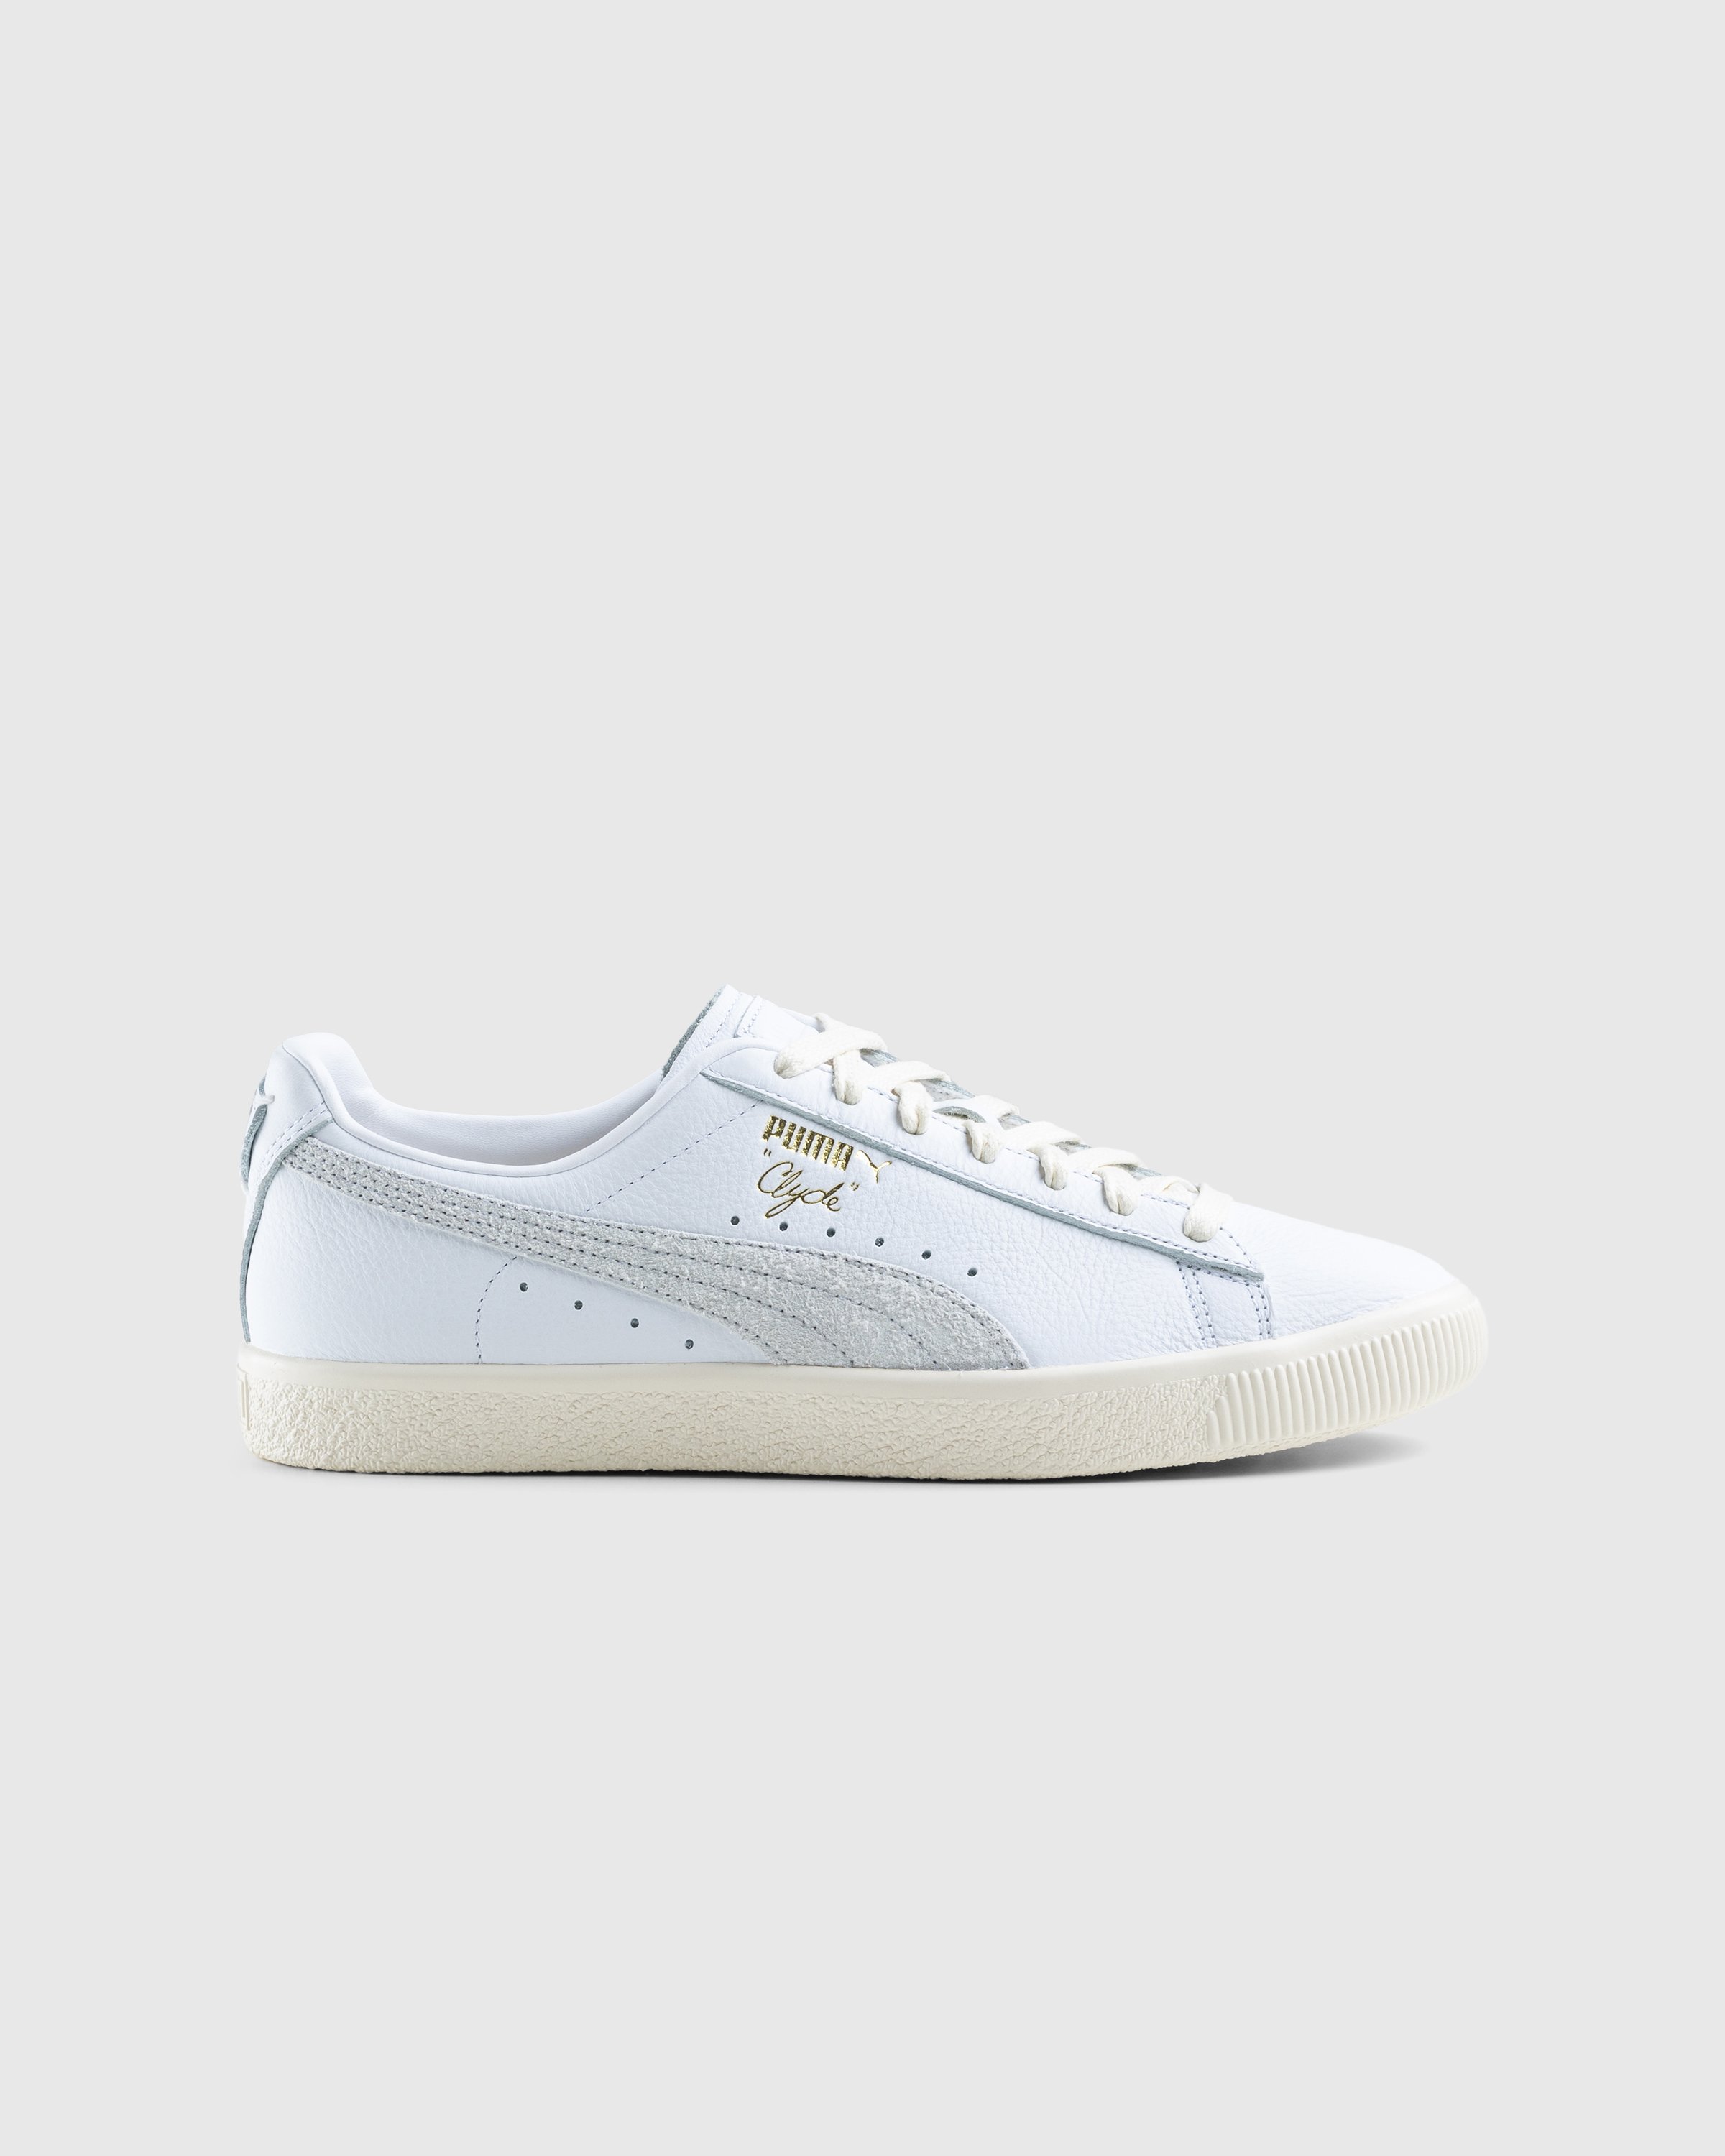 Puma - Clyde Base White - Footwear - White - Image 1